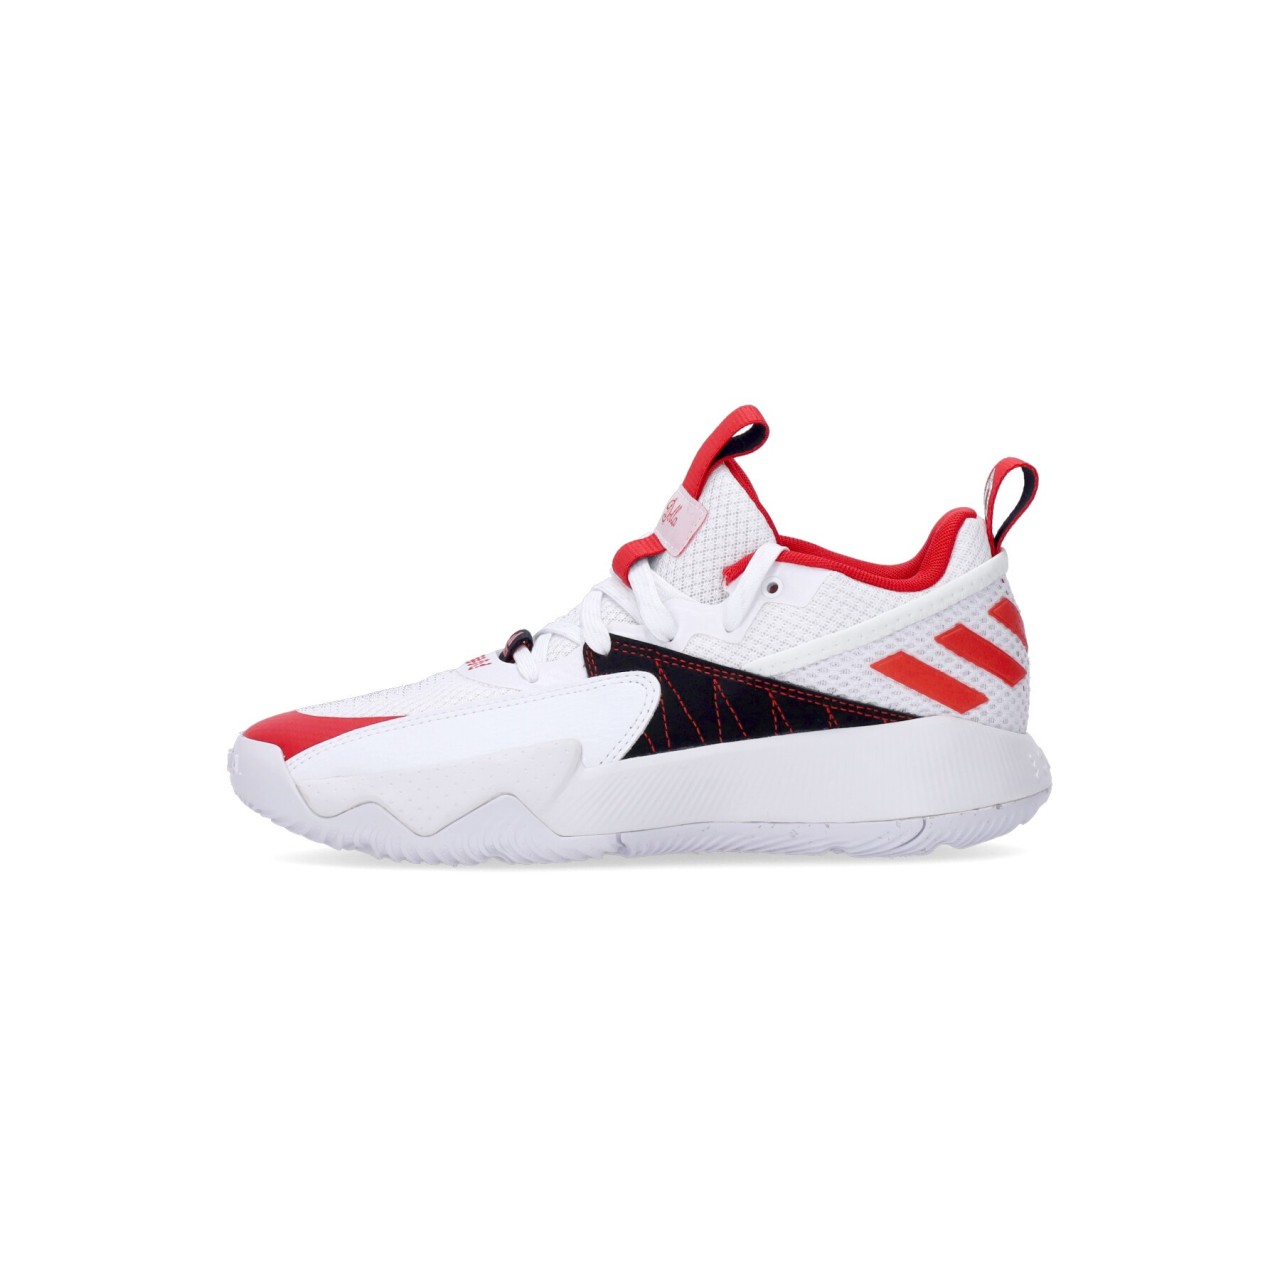 ADIDAS DAME CERTIFIED GY8965